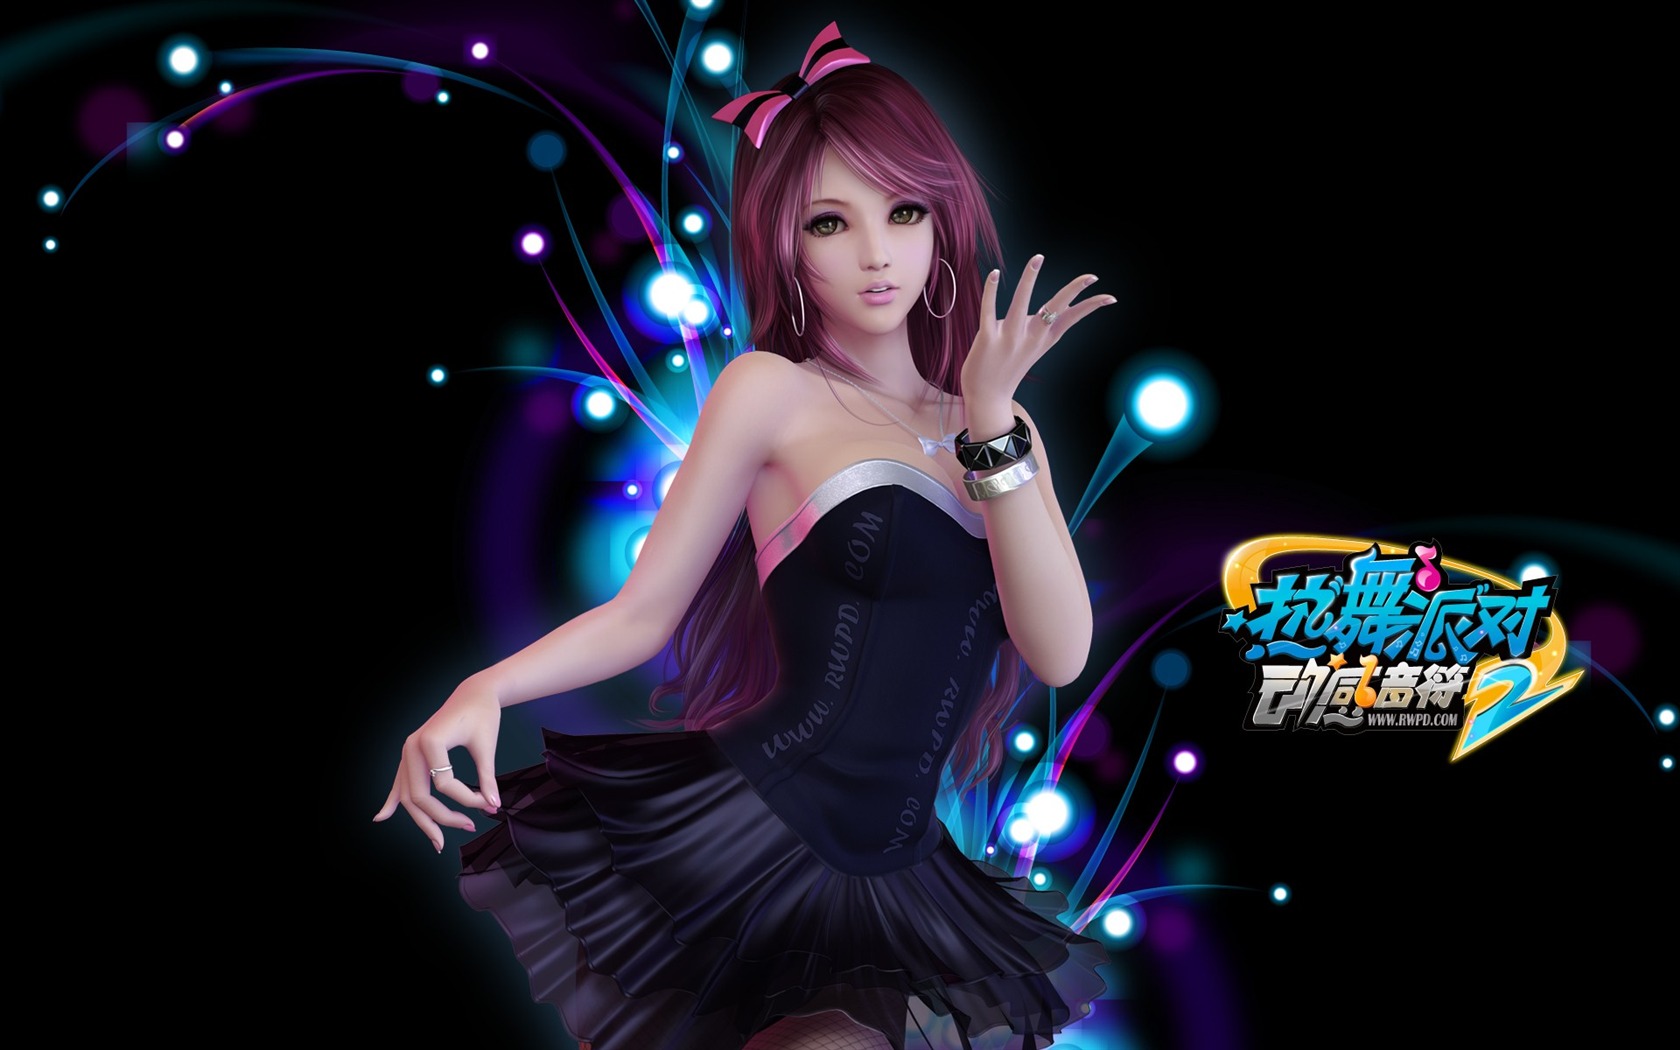 Online game Hot Dance Party II official wallpapers #31 - 1680x1050